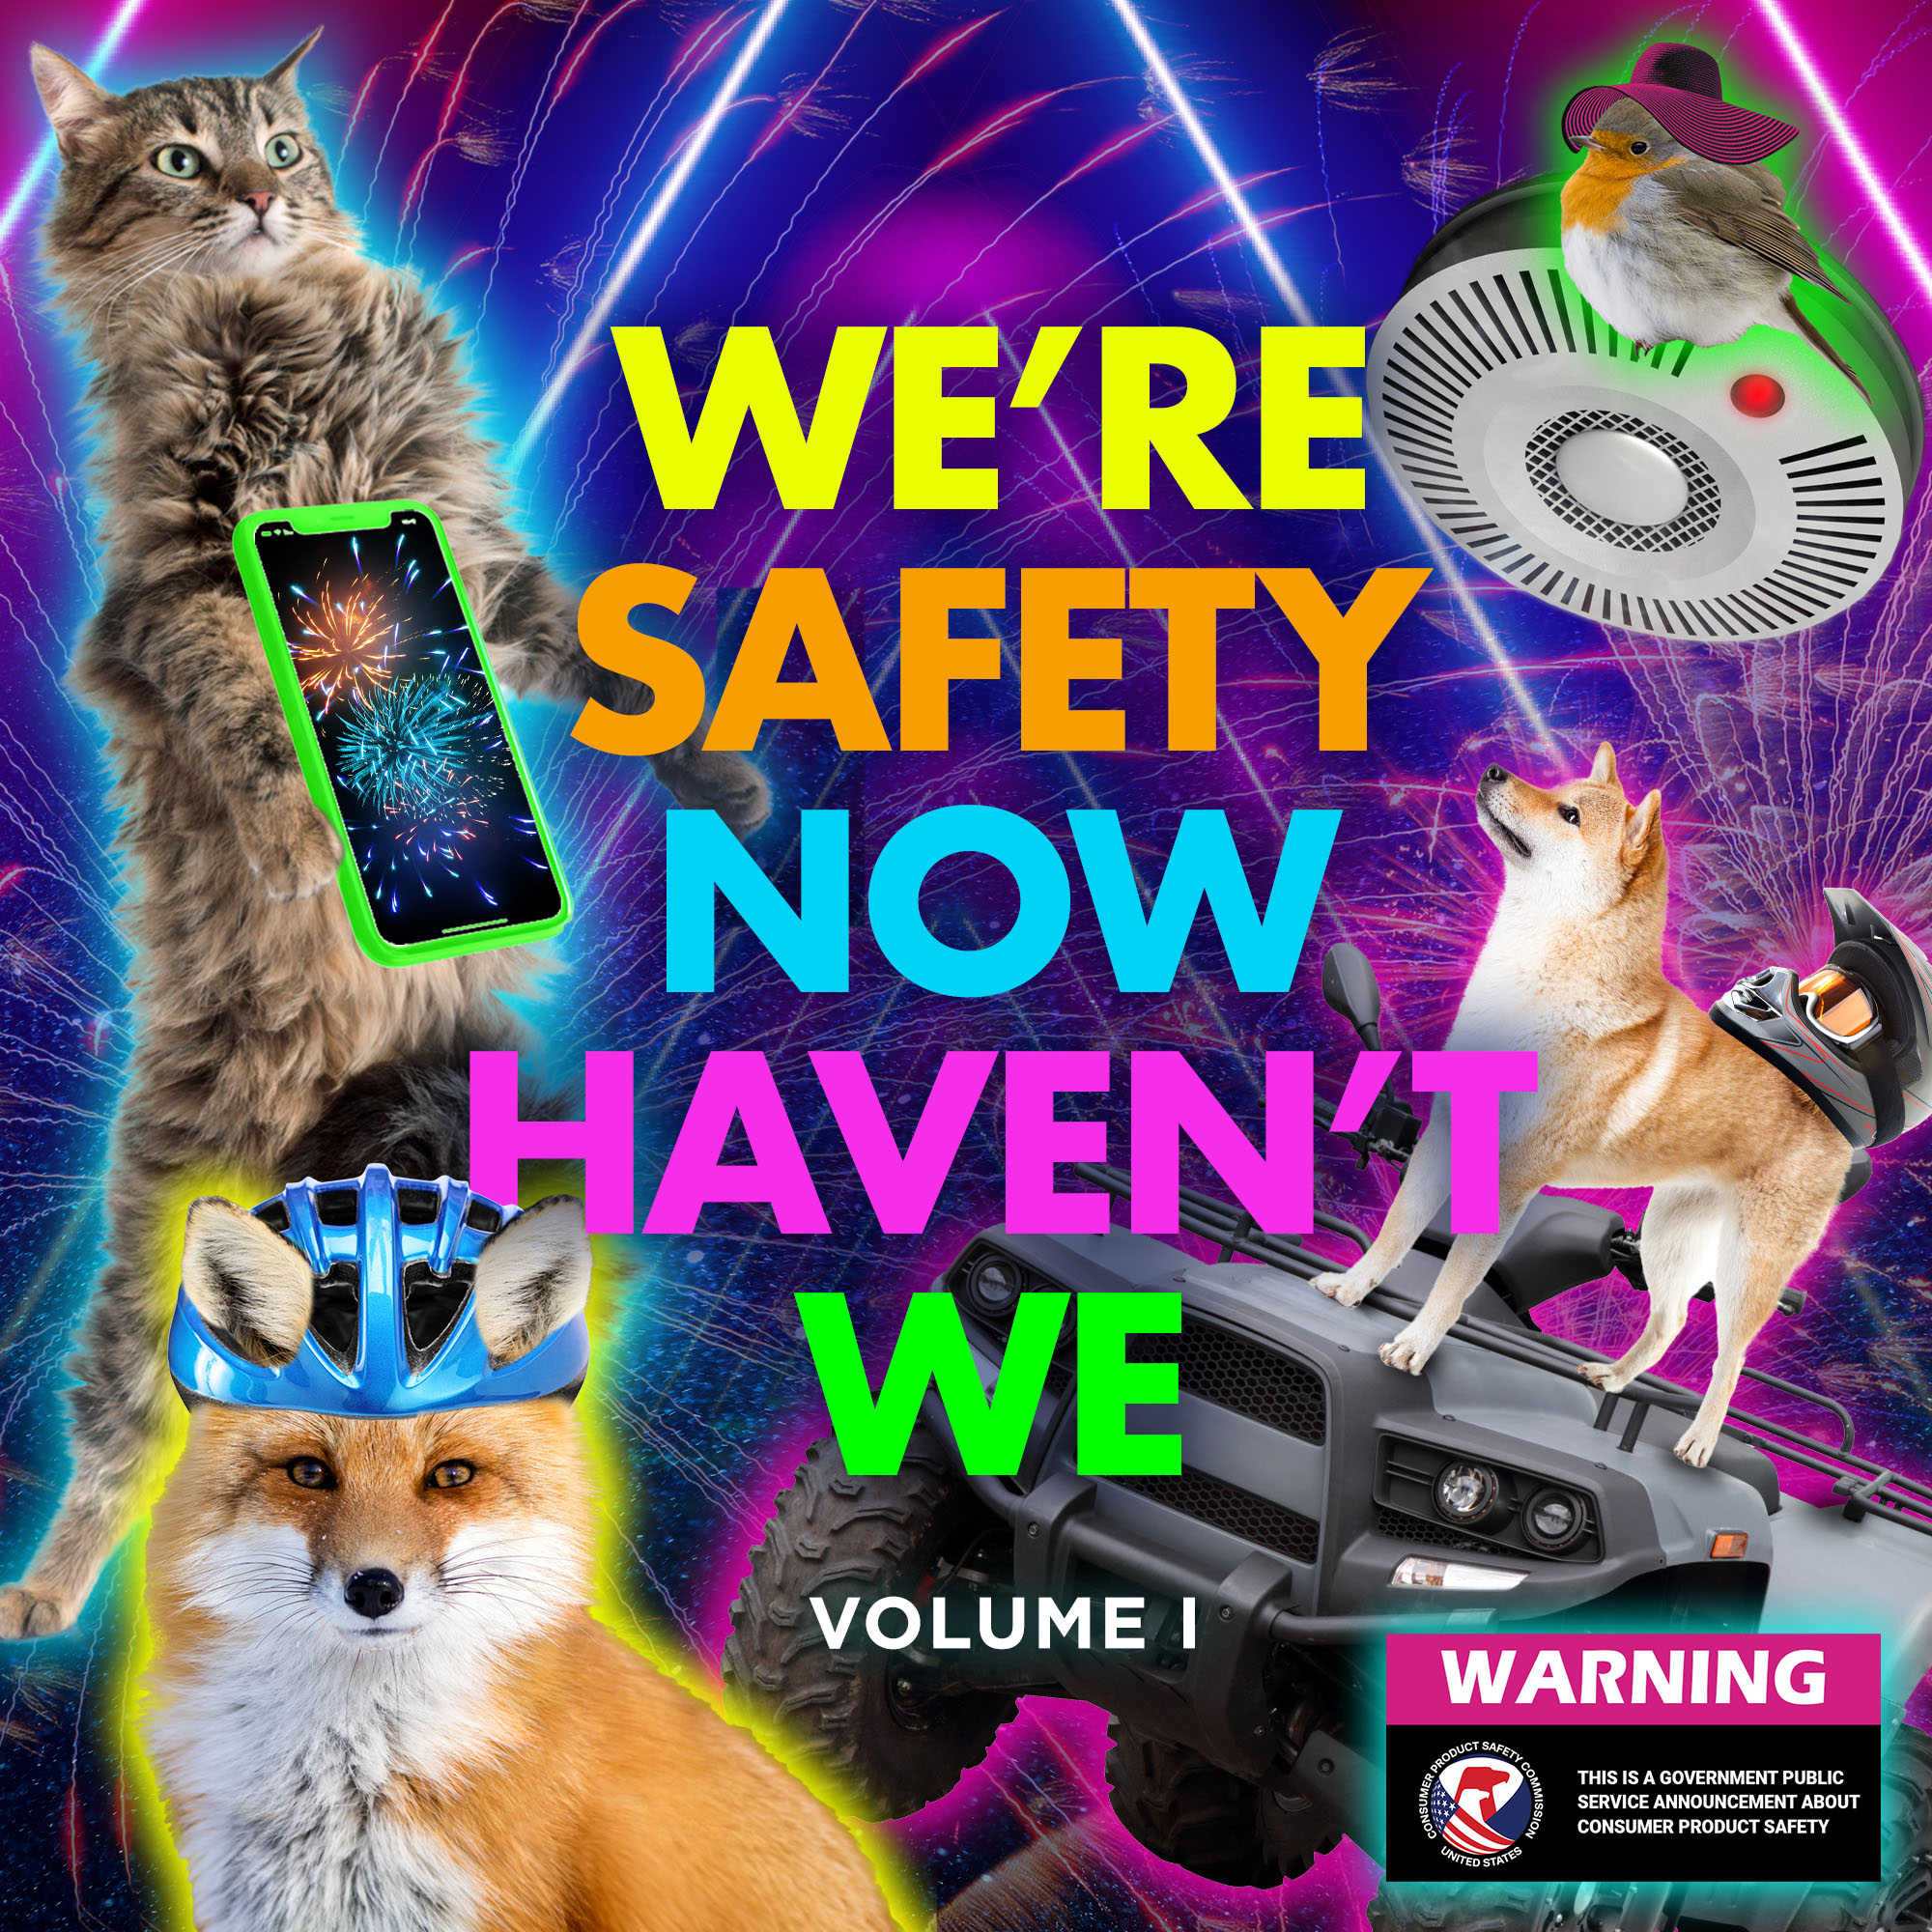 We’re Safety Now Haven’t We Album Cover